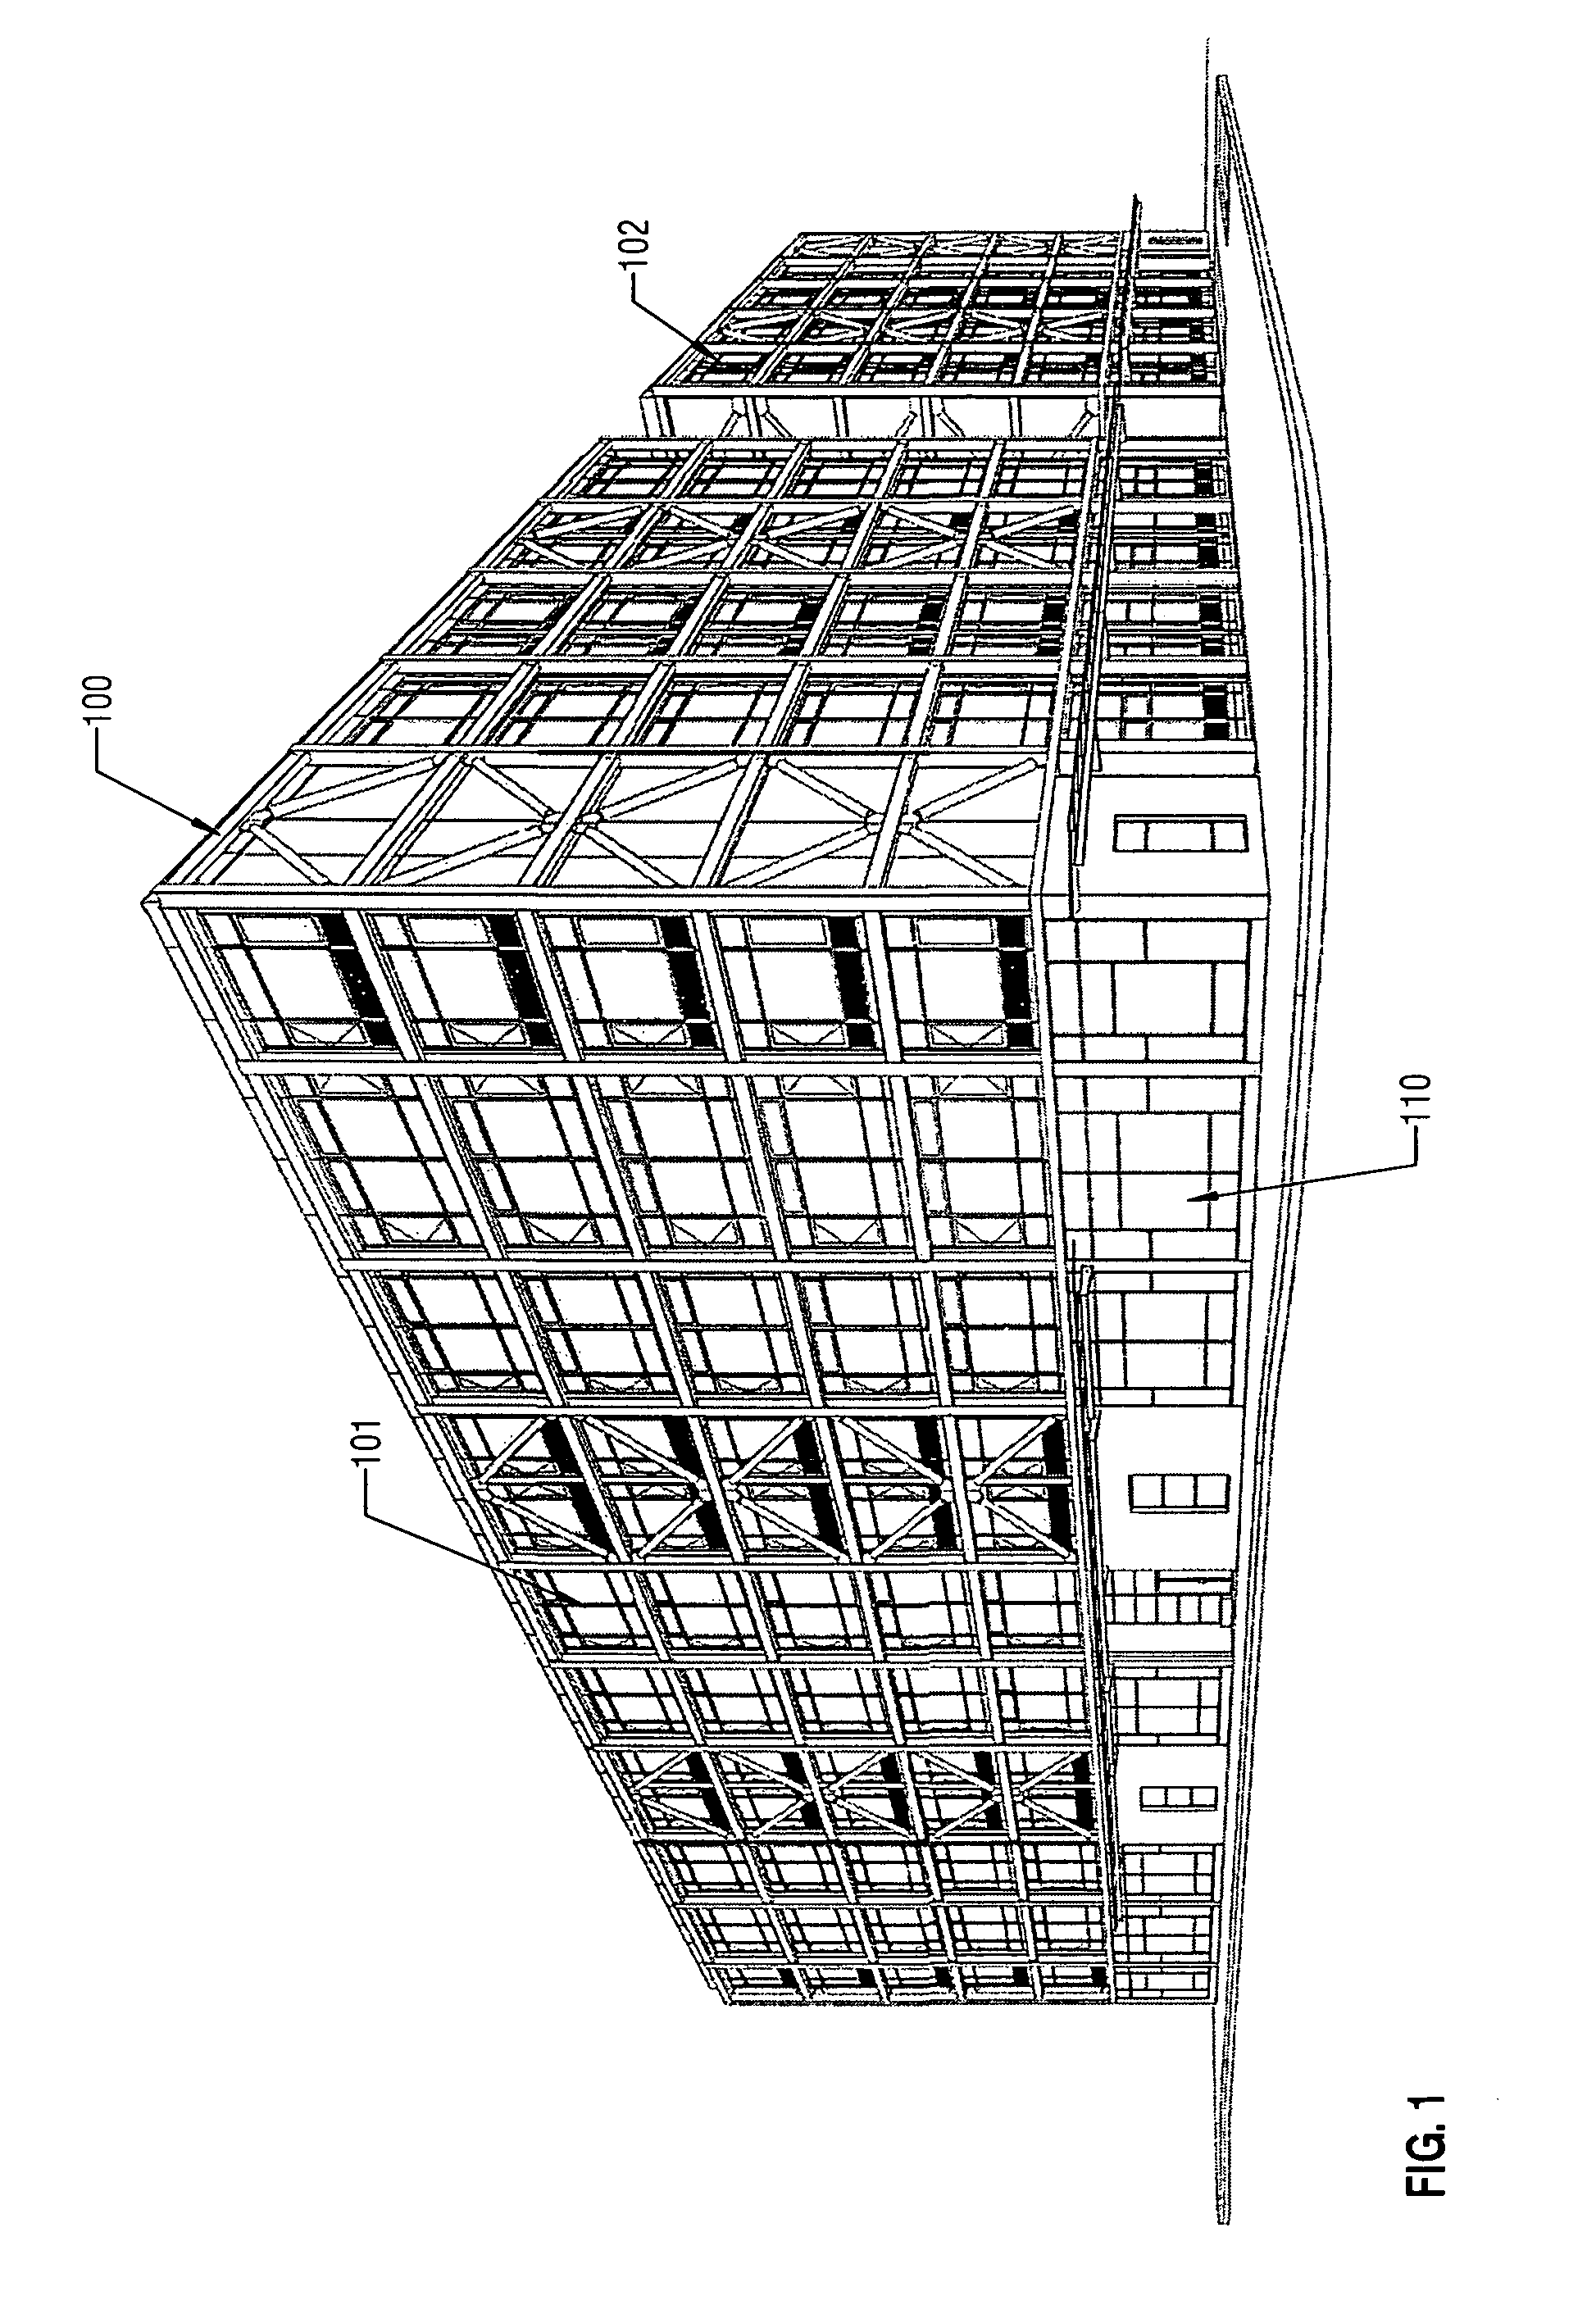 Slab construction system and method for constructing multi-story buildings using pre-manufactured structures